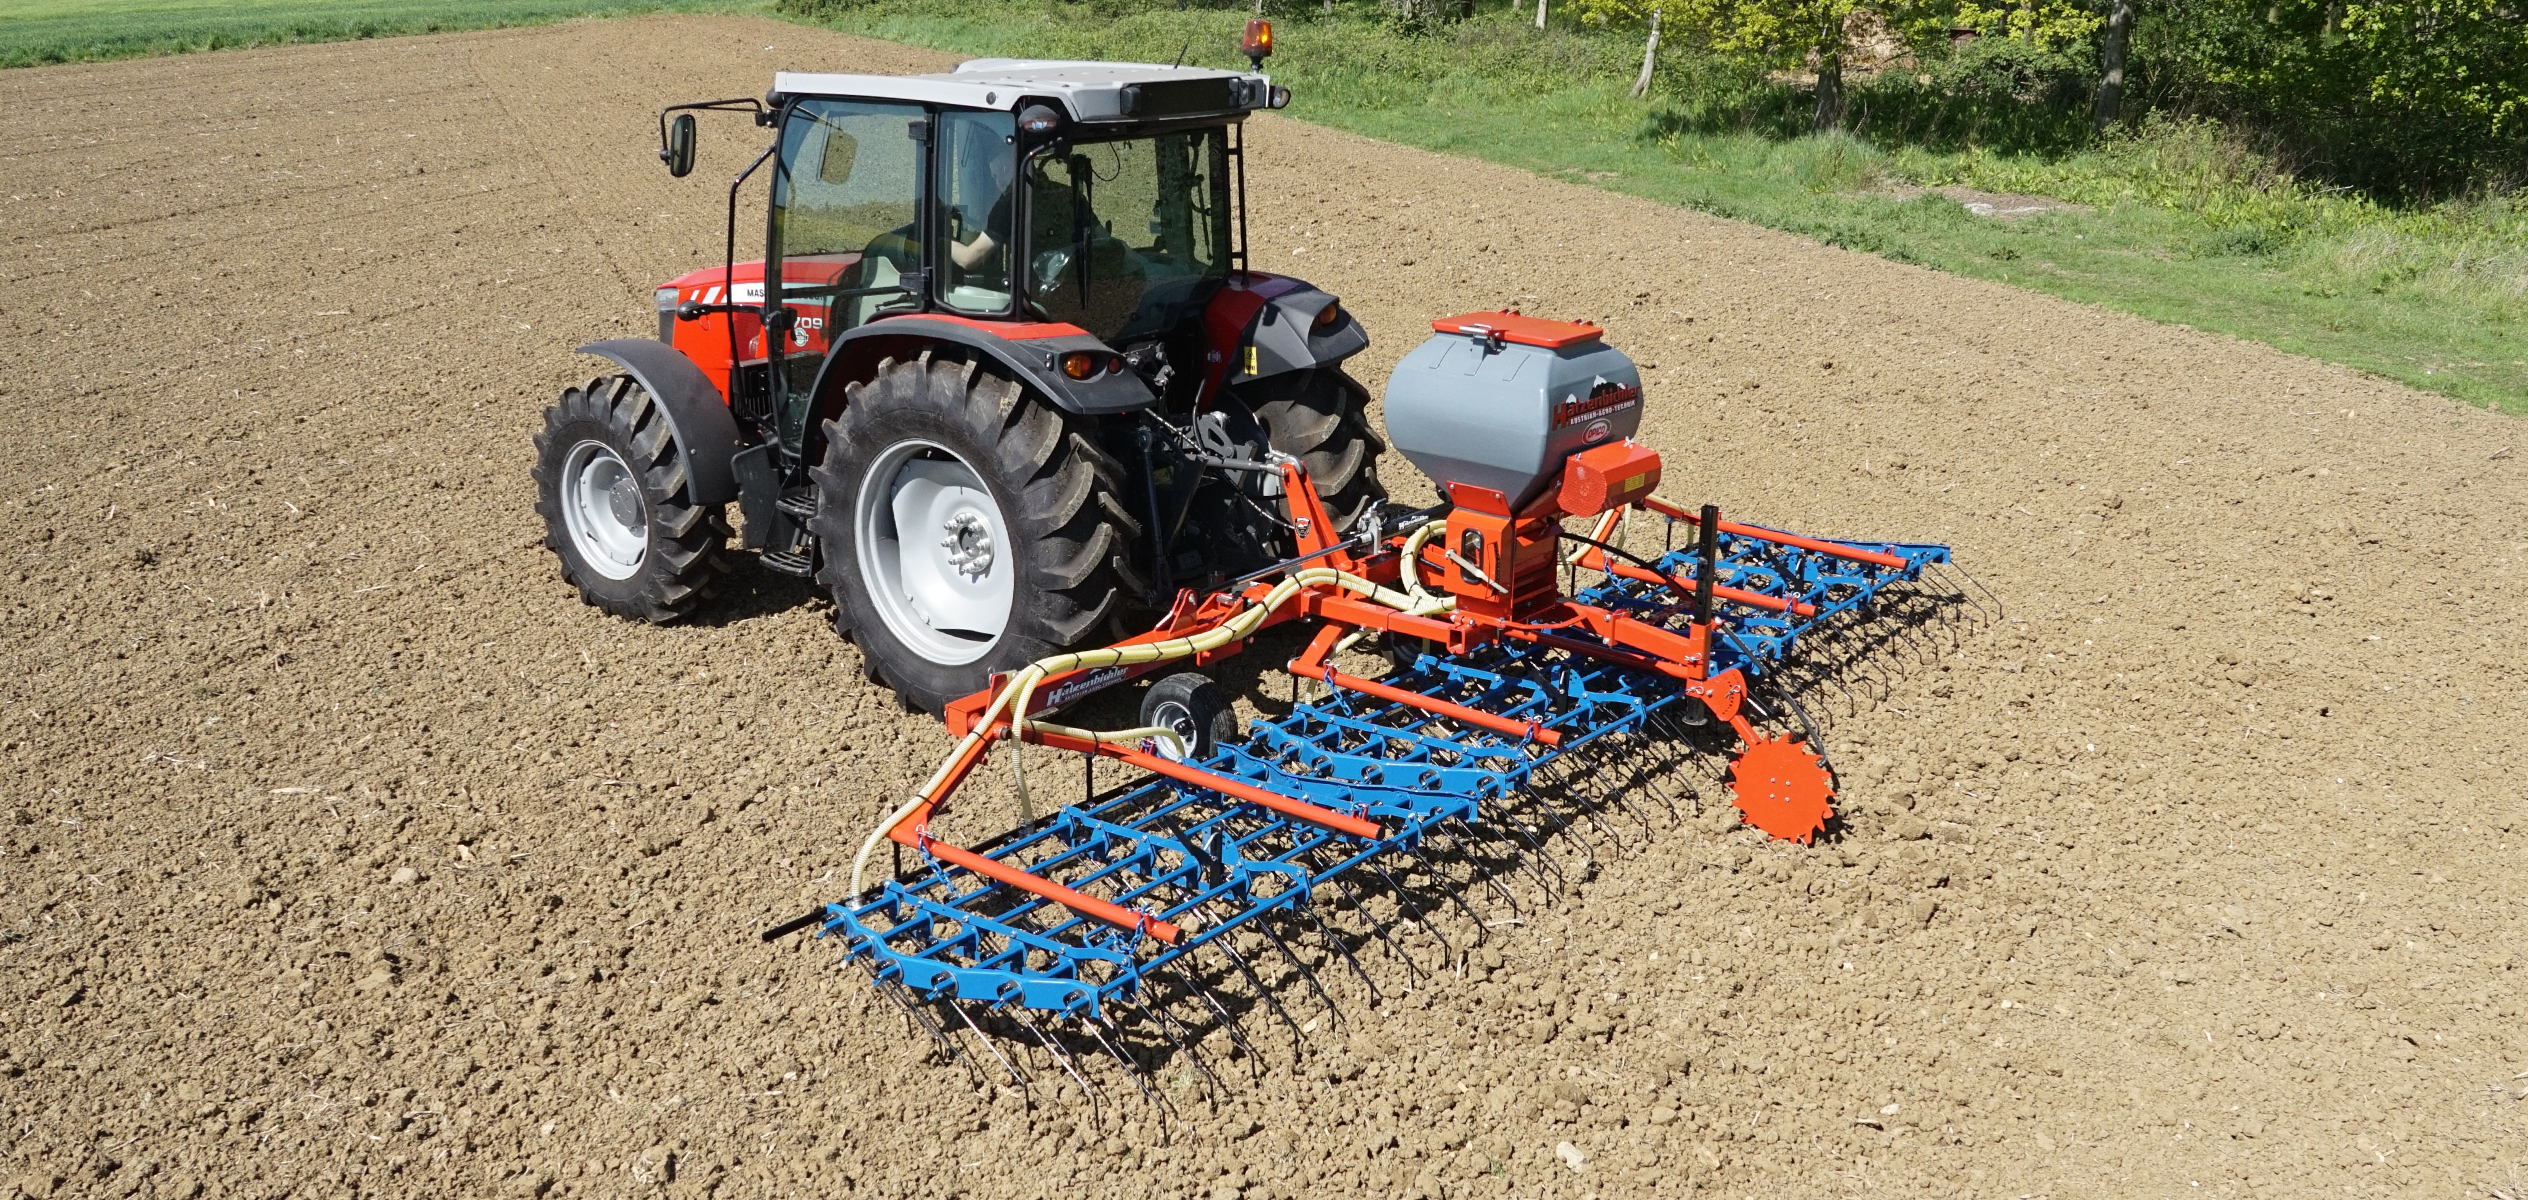 OPICo Grass Harrow and Air Seeder mounted to a Massey Ferguson tractor in cultivated field